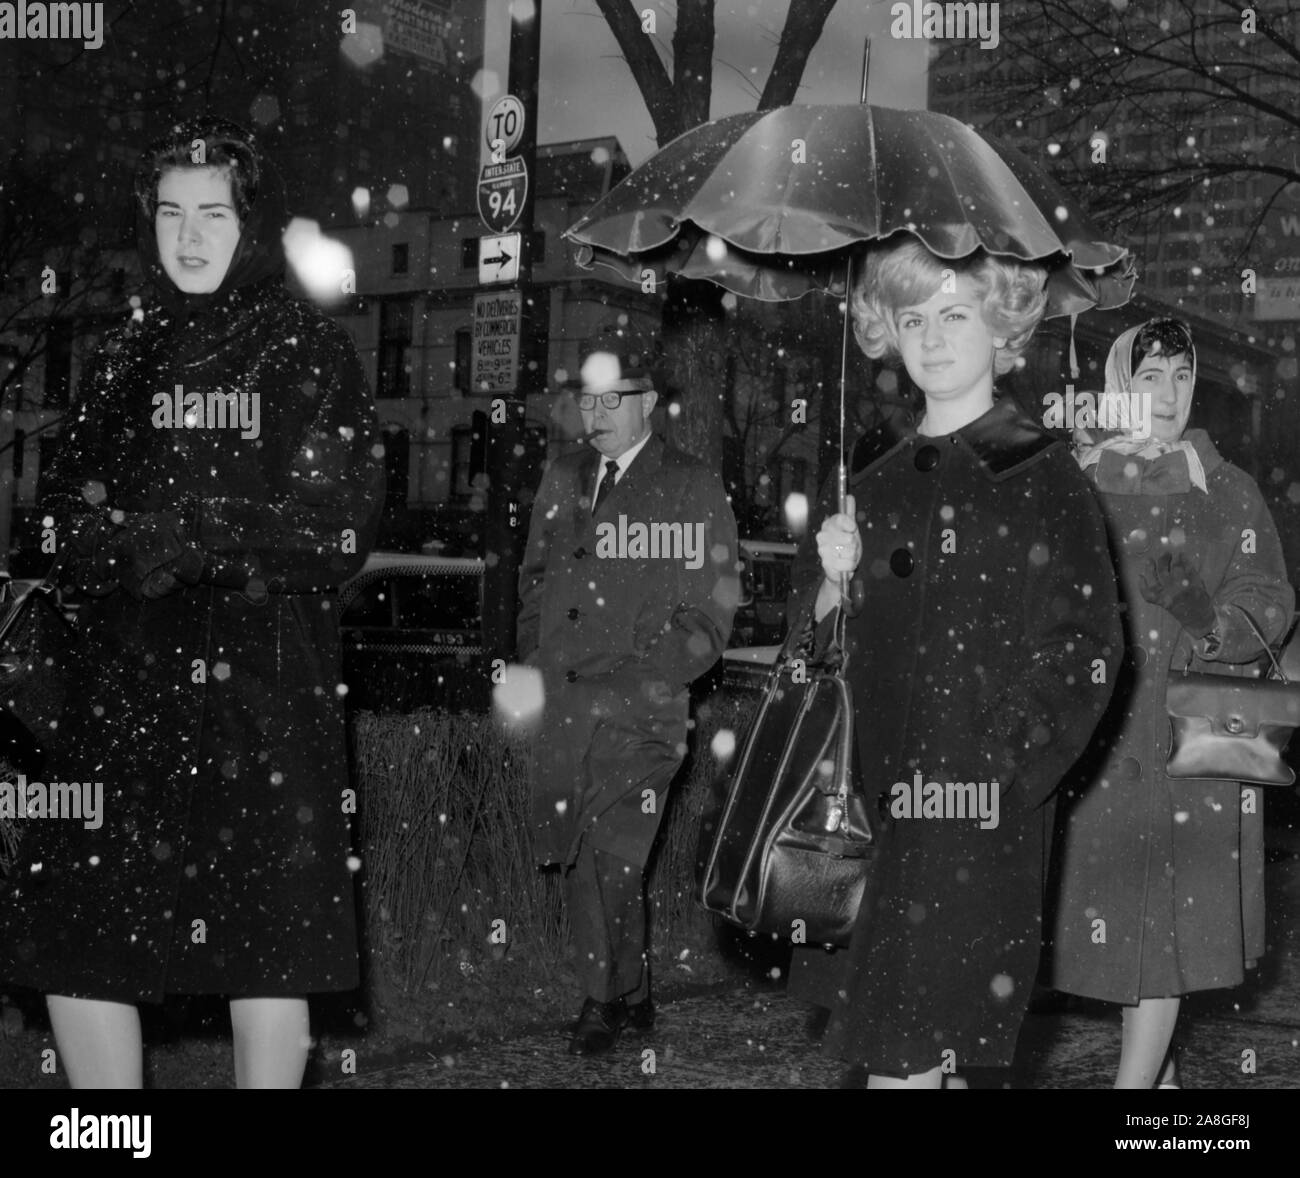 Pedestrians walk along Michigan Ave. in Chicago as the snowflakes begin to fly, ca. 1962. Stock Photo